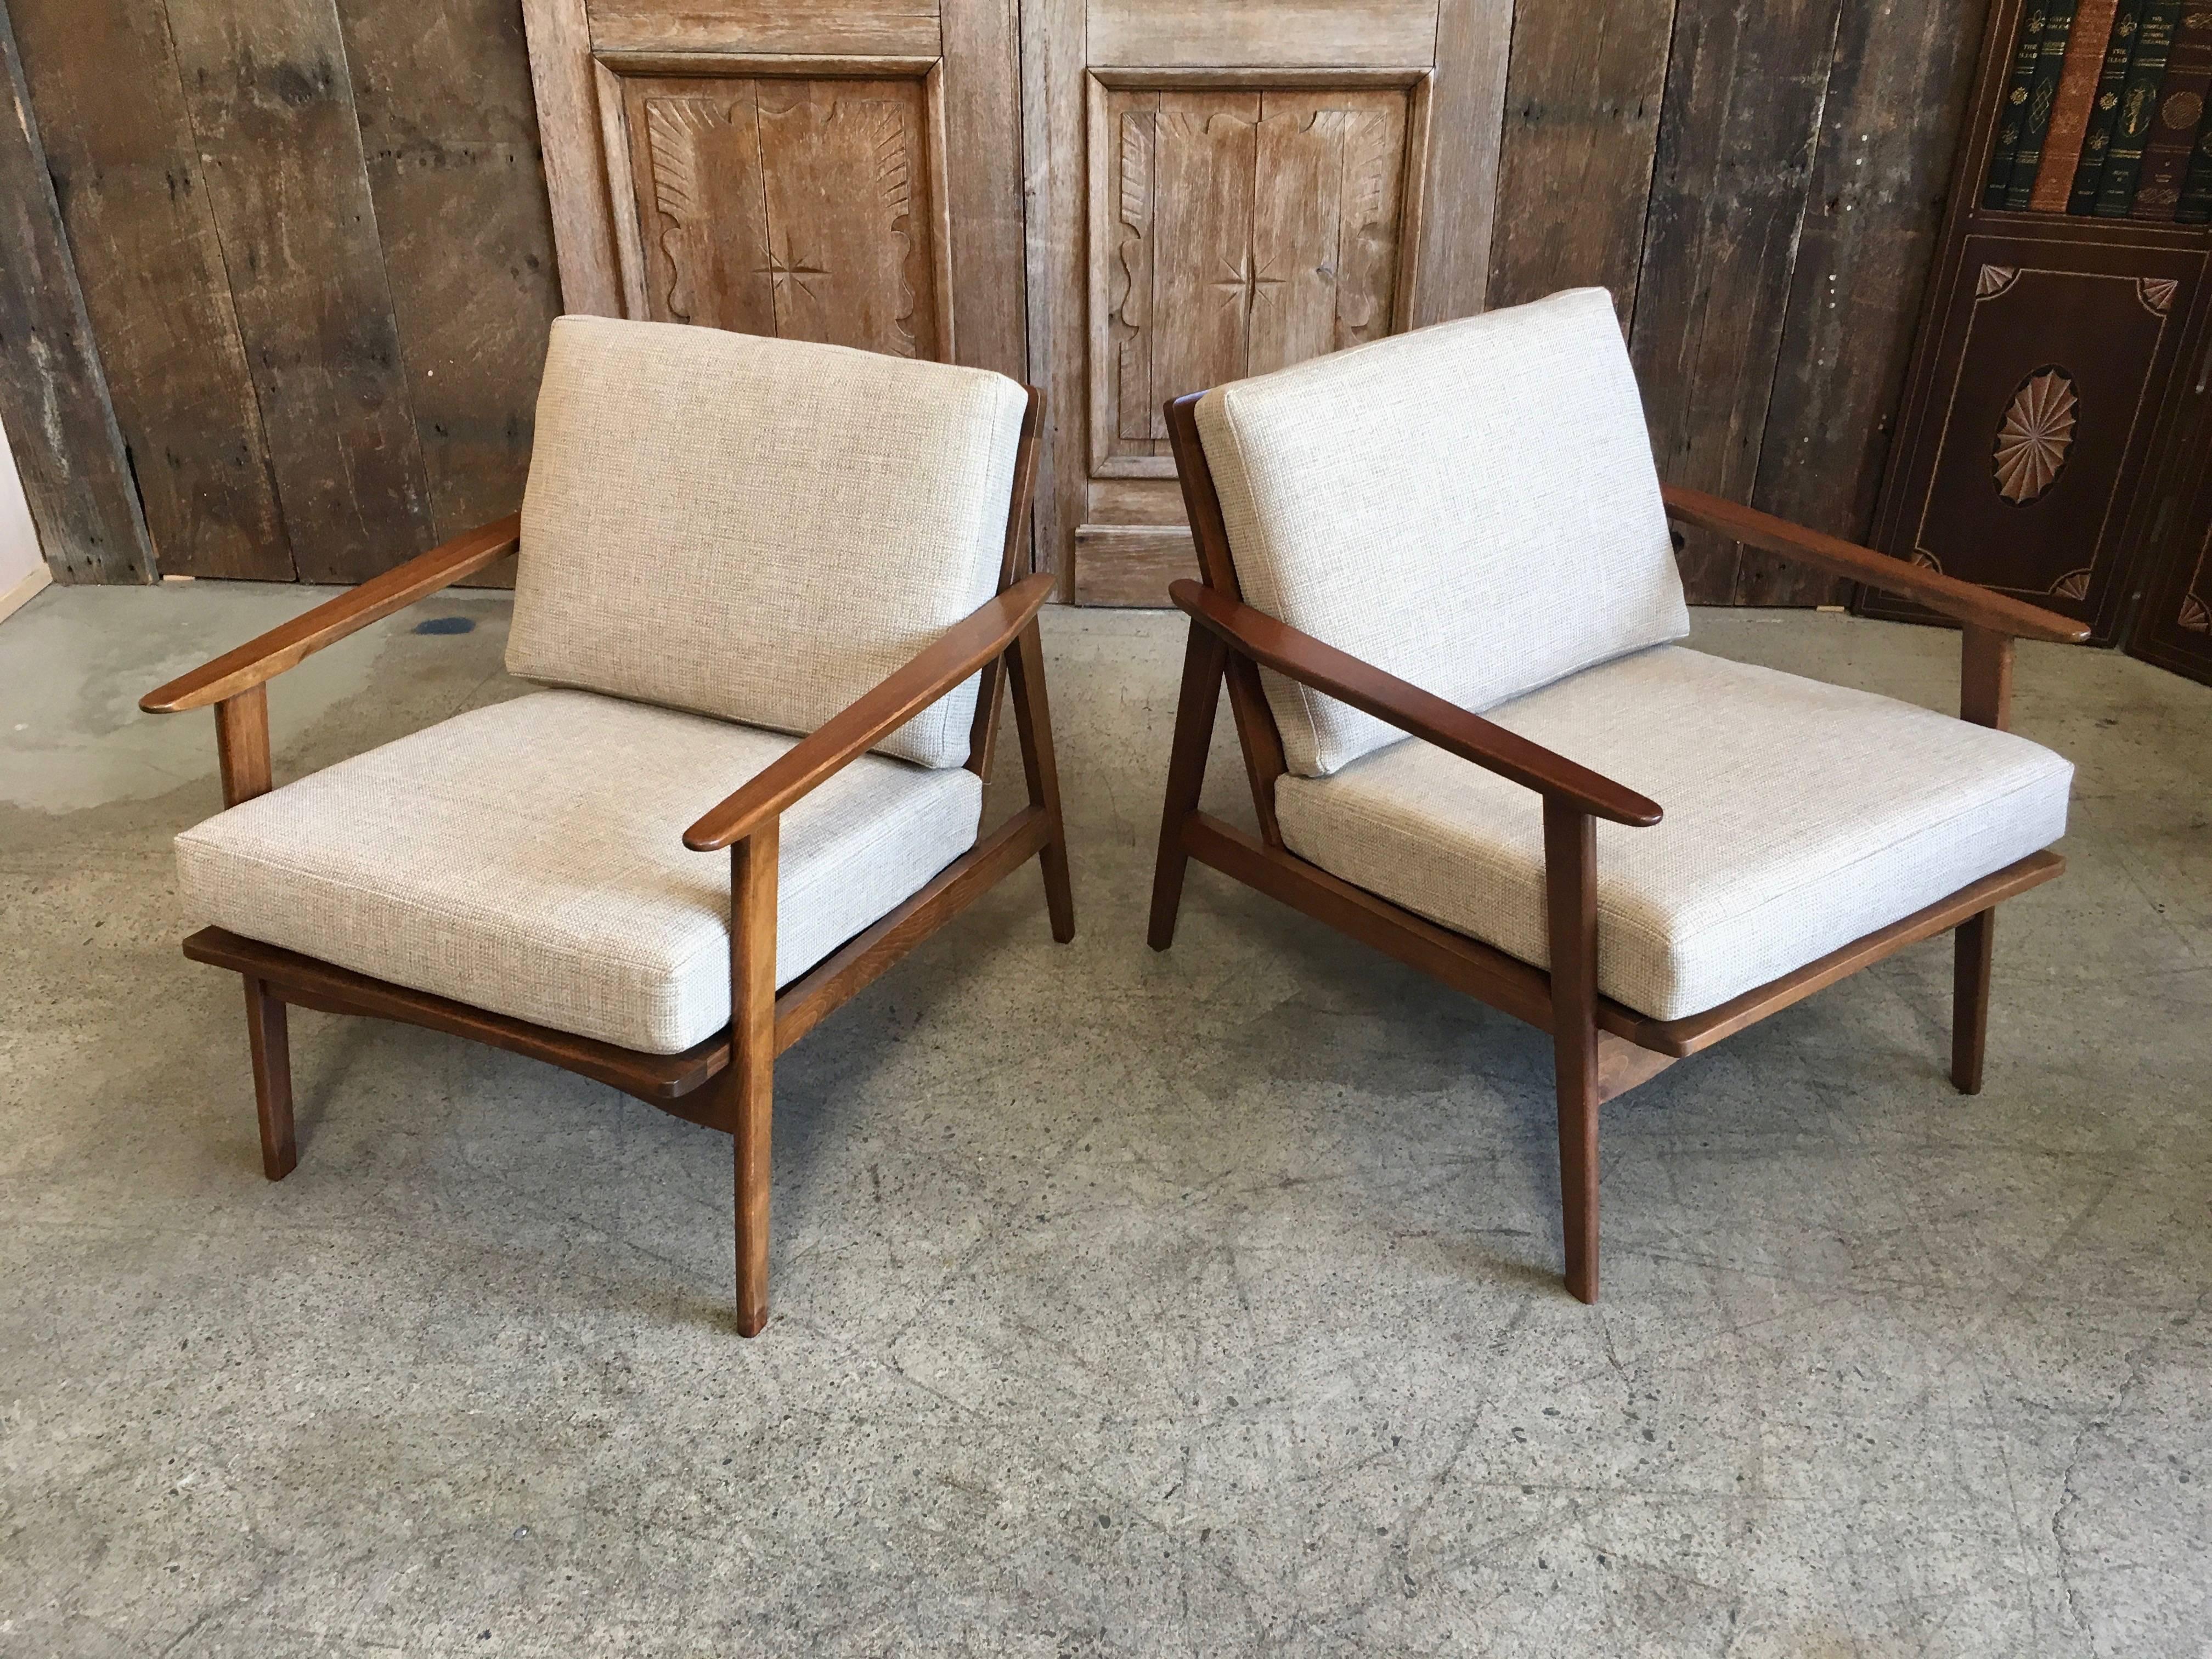 Angular walnut stained hardwood chairs with new fabric and foam.